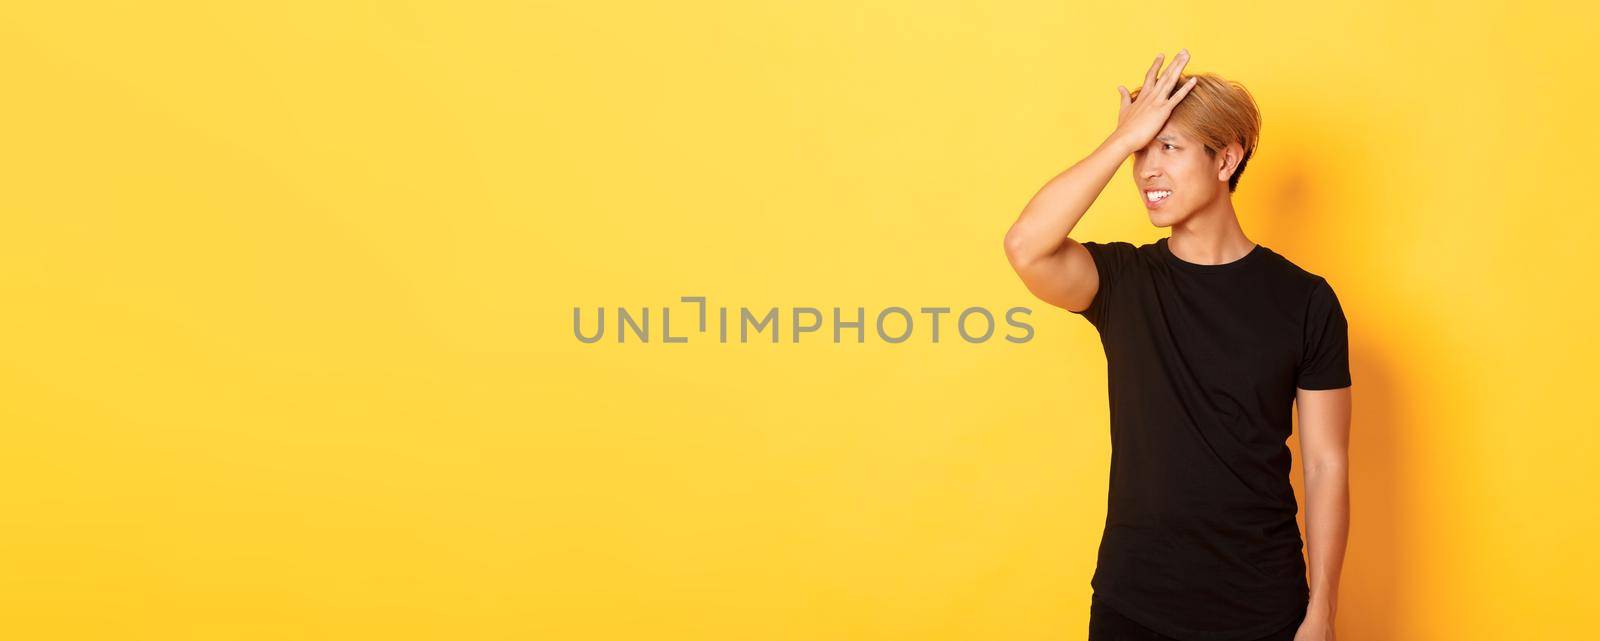 Upset and troubled asian guy snap forehead forgetful, standing over yellow background.